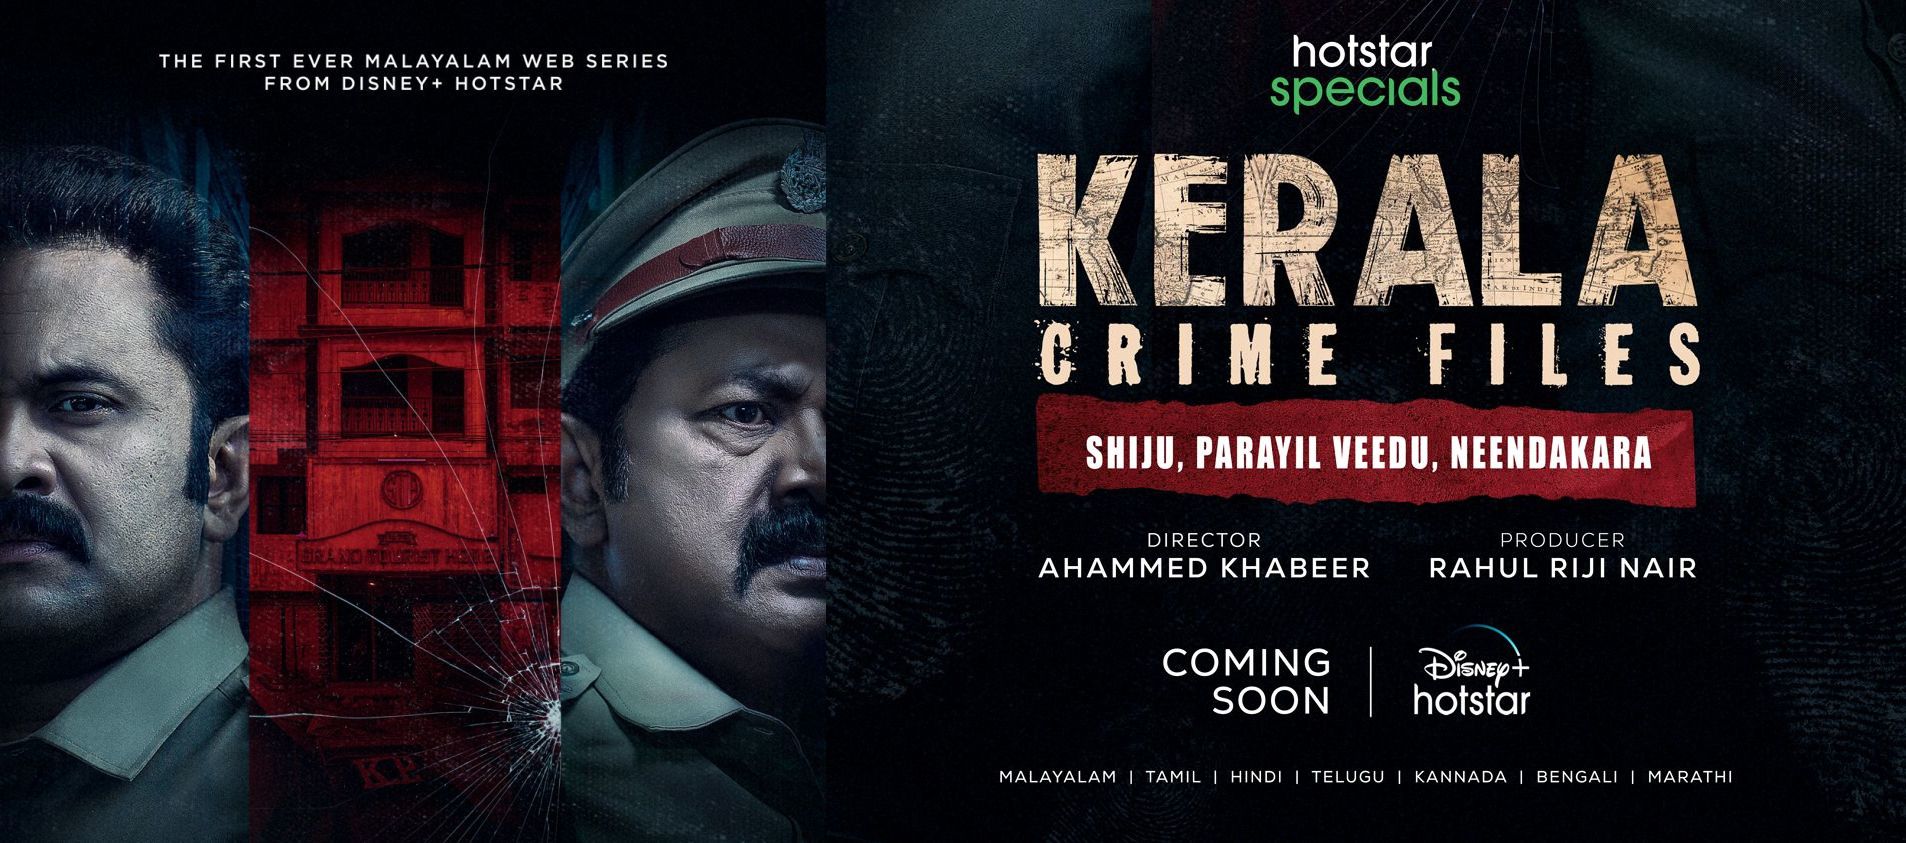 #Home Malayalam Family Drama OTT Release On 19th August - Amazon Prime Video 8